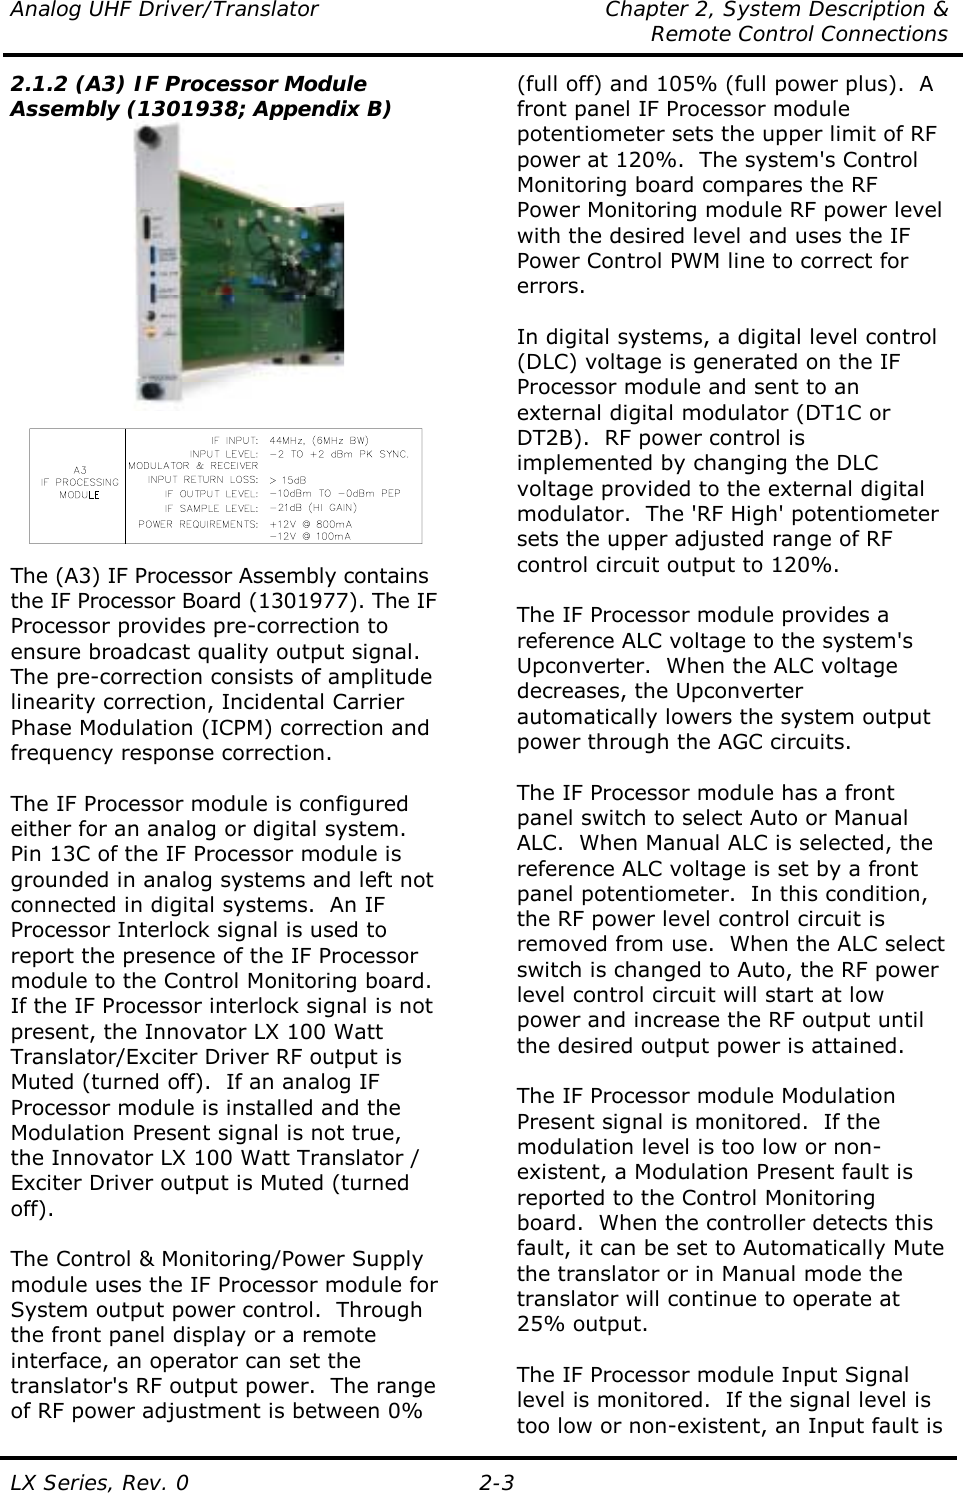 Analog UHF Driver/Translator  Chapter 2, System Description &amp;   Remote Control Connections LX Series, Rev. 0  2-3 2.1.2 (A3) IF Processor Module Assembly (1301938; Appendix B)   The (A3) IF Processor Assembly contains the IF Processor Board (1301977). The IF Processor provides pre-correction to ensure broadcast quality output signal. The pre-correction consists of amplitude linearity correction, Incidental Carrier Phase Modulation (ICPM) correction and frequency response correction.  The IF Processor module is configured either for an analog or digital system.  Pin 13C of the IF Processor module is grounded in analog systems and left not connected in digital systems.  An IF Processor Interlock signal is used to report the presence of the IF Processor module to the Control Monitoring board.  If the IF Processor interlock signal is not present, the Innovator LX 100 Watt Translator/Exciter Driver RF output is Muted (turned off).  If an analog IF Processor module is installed and the Modulation Present signal is not true, the Innovator LX 100 Watt Translator / Exciter Driver output is Muted (turned off).  The Control &amp; Monitoring/Power Supply module uses the IF Processor module for System output power control.  Through the front panel display or a remote interface, an operator can set the translator&apos;s RF output power.  The range of RF power adjustment is between 0% (full off) and 105% (full power plus).  A front panel IF Processor module potentiometer sets the upper limit of RF power at 120%.  The system&apos;s Control Monitoring board compares the RF Power Monitoring module RF power level with the desired level and uses the IF Power Control PWM line to correct for errors.   In digital systems, a digital level control (DLC) voltage is generated on the IF Processor module and sent to an external digital modulator (DT1C or DT2B).  RF power control is implemented by changing the DLC voltage provided to the external digital modulator.  The &apos;RF High&apos; potentiometer sets the upper adjusted range of RF control circuit output to 120%.   The IF Processor module provides a reference ALC voltage to the system&apos;s Upconverter.  When the ALC voltage decreases, the Upconverter automatically lowers the system output power through the AGC circuits.  The IF Processor module has a front panel switch to select Auto or Manual ALC.  When Manual ALC is selected, the reference ALC voltage is set by a front panel potentiometer.  In this condition, the RF power level control circuit is removed from use.  When the ALC select switch is changed to Auto, the RF power level control circuit will start at low power and increase the RF output until the desired output power is attained.  The IF Processor module Modulation Present signal is monitored.  If the modulation level is too low or non-existent, a Modulation Present fault is reported to the Control Monitoring board.  When the controller detects this fault, it can be set to Automatically Mute the translator or in Manual mode the translator will continue to operate at 25% output.   The IF Processor module Input Signal level is monitored.  If the signal level is too low or non-existent, an Input fault is 